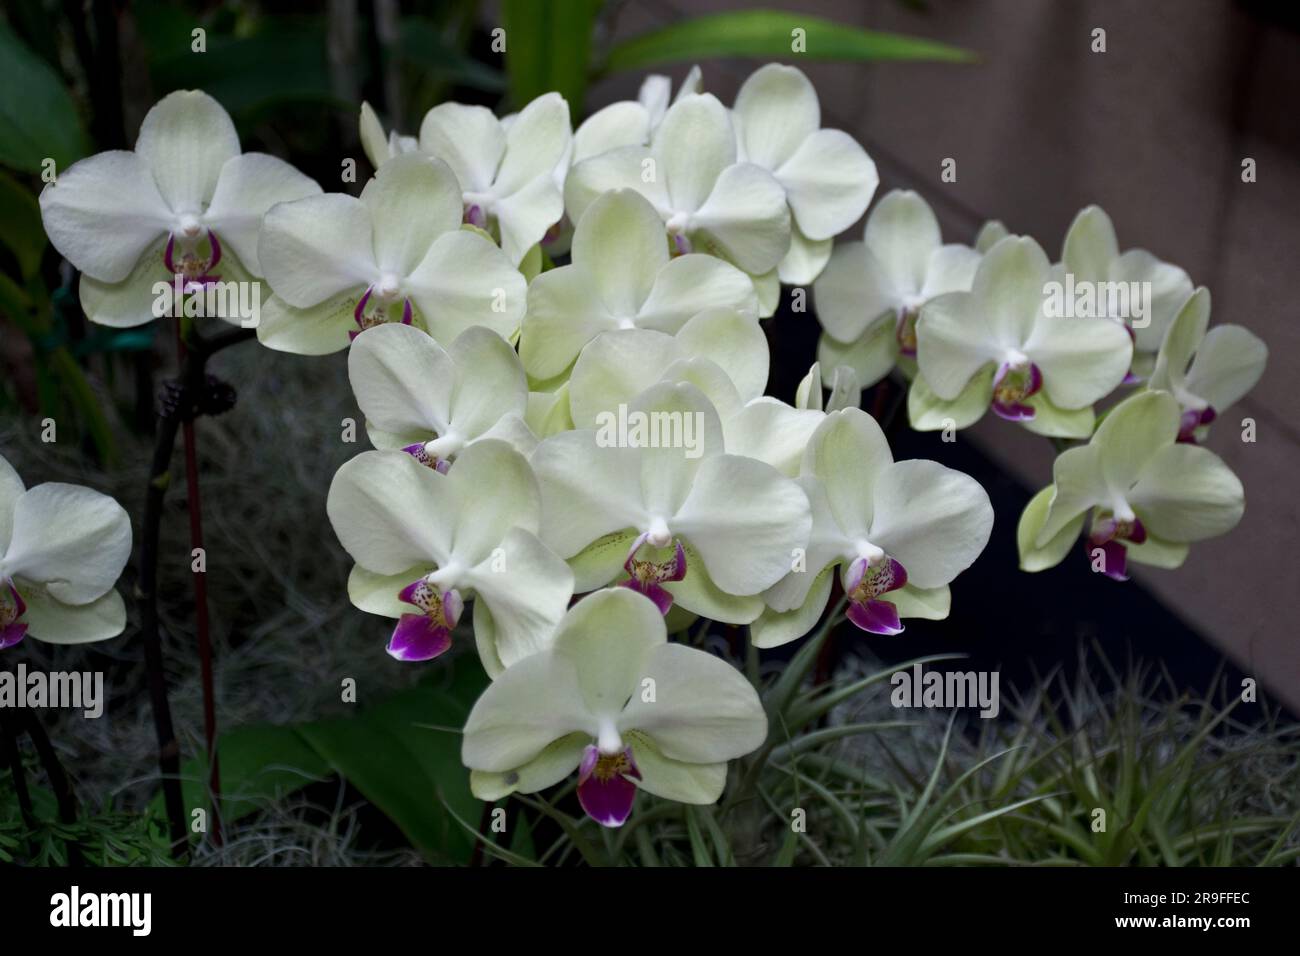 Closeup picture of beautiful ornamental creamy white orchid flowers with some purple color petals Stock Photo